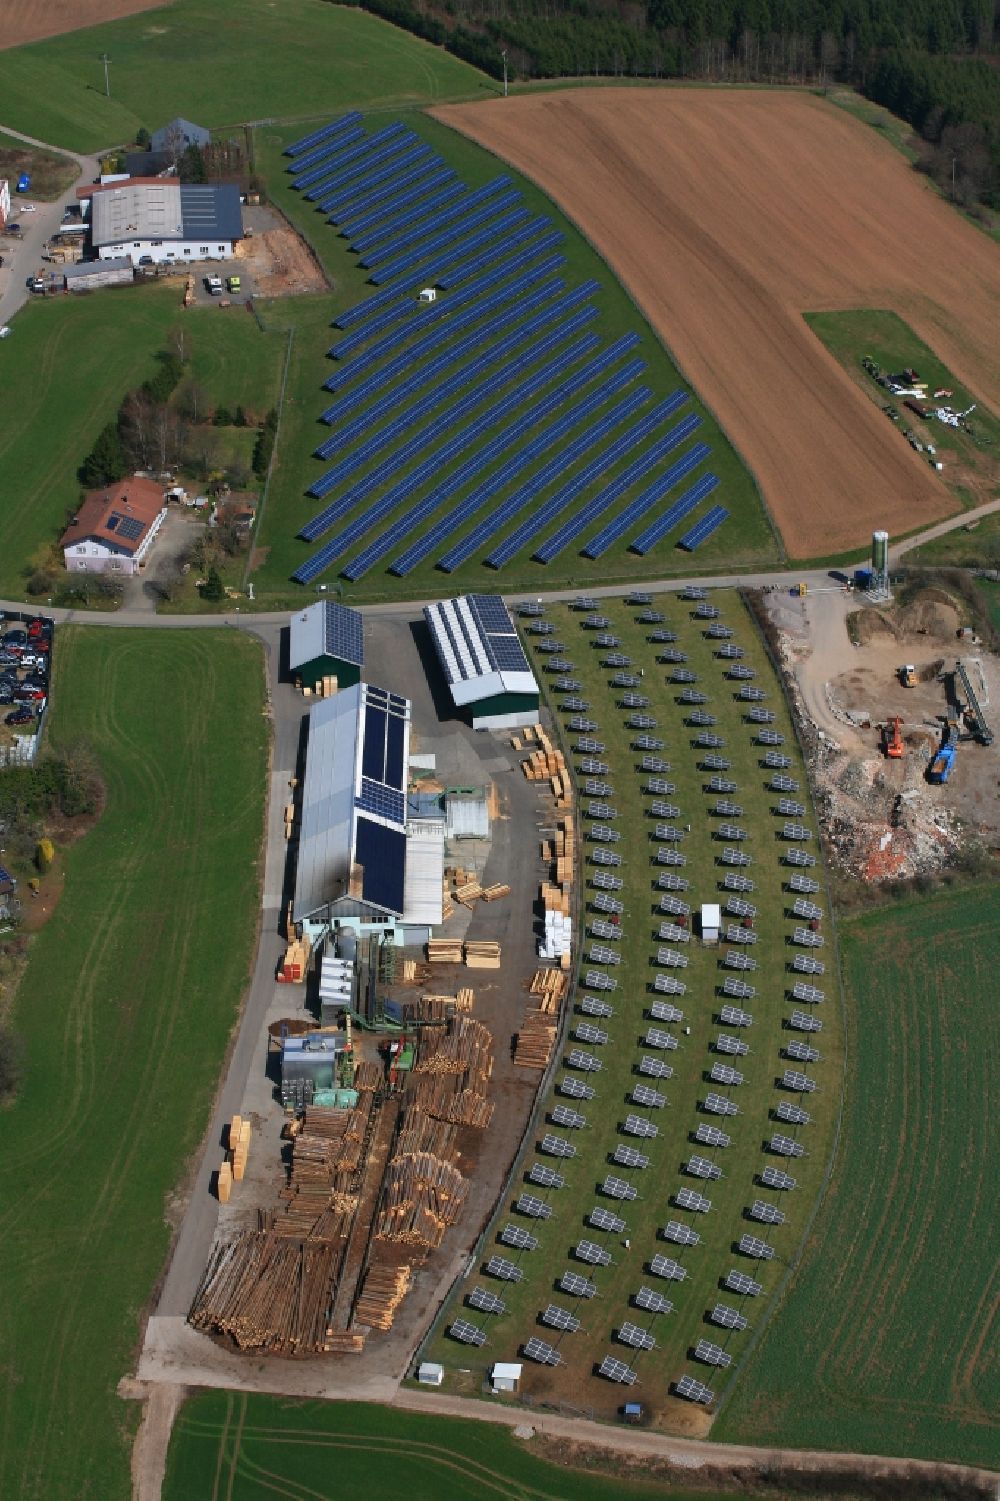 Murg from the bird's eye view: Panel rows of photovoltaic and solar farm or solar power plant in the district Haenner of Murg in the state Baden-Wuerttemberg, Germany